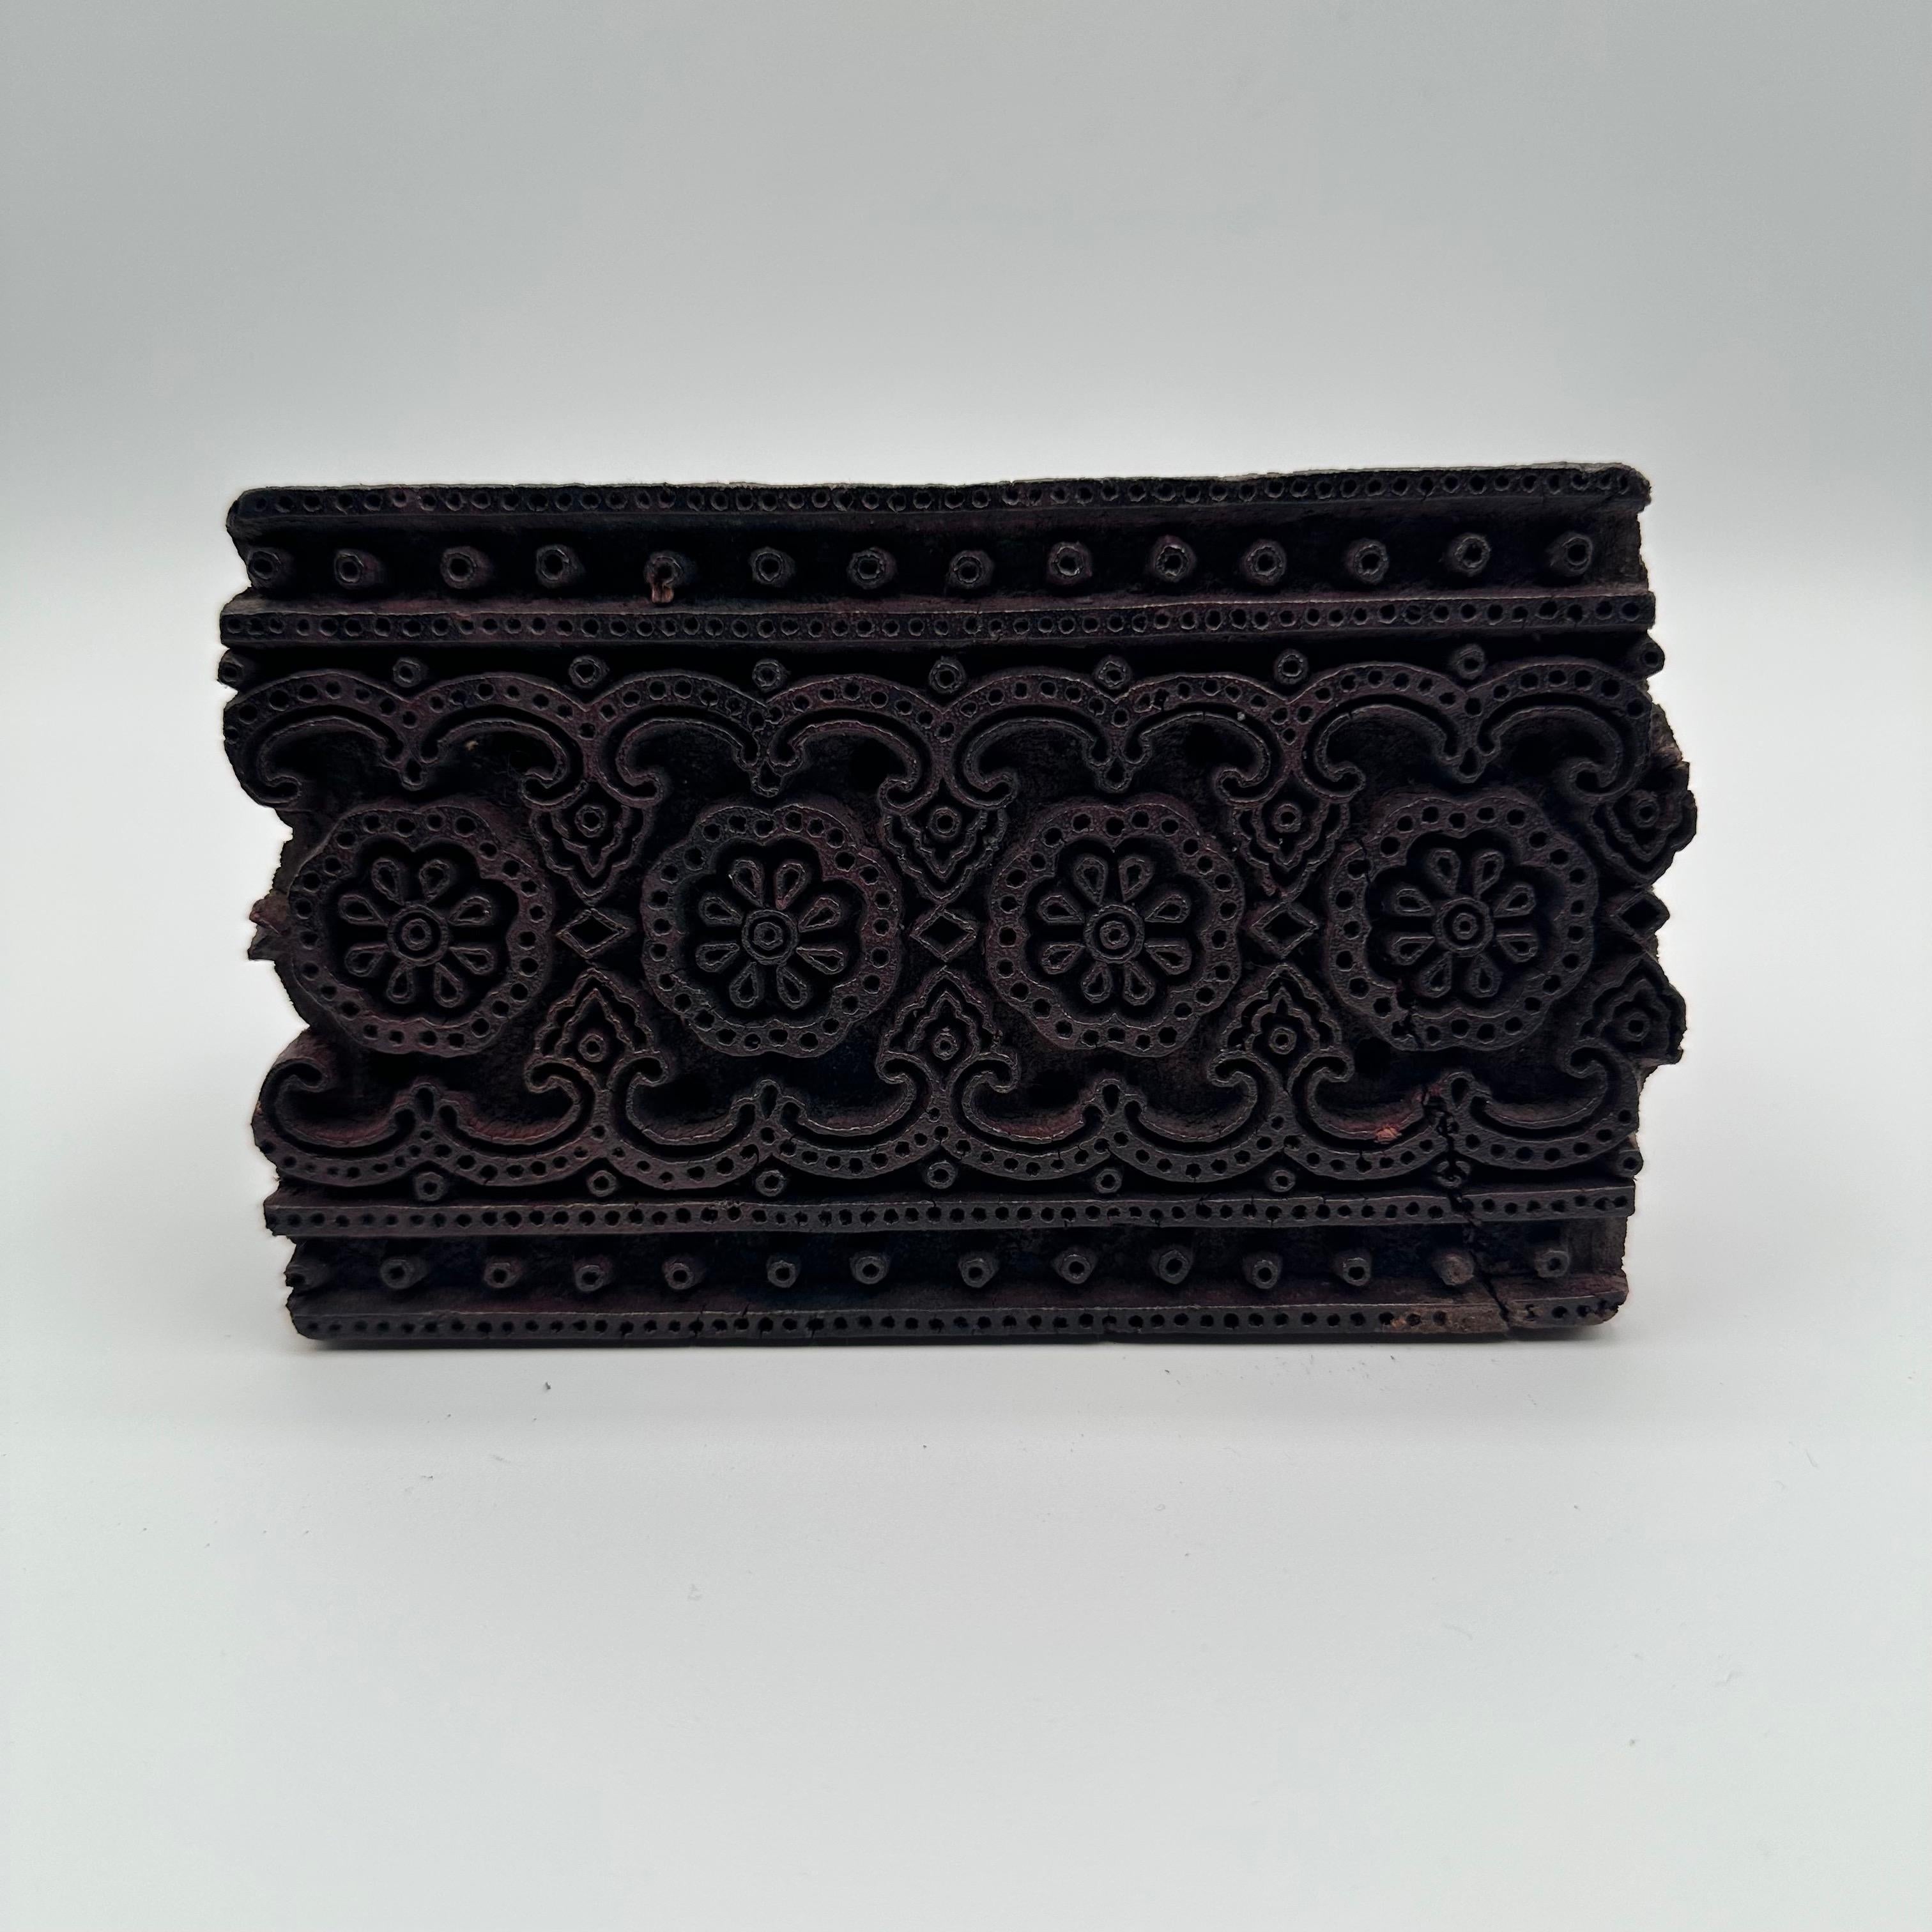 Antique Hand Carved Wood Printing Block in Dark Rosette Pattern For Sale 6